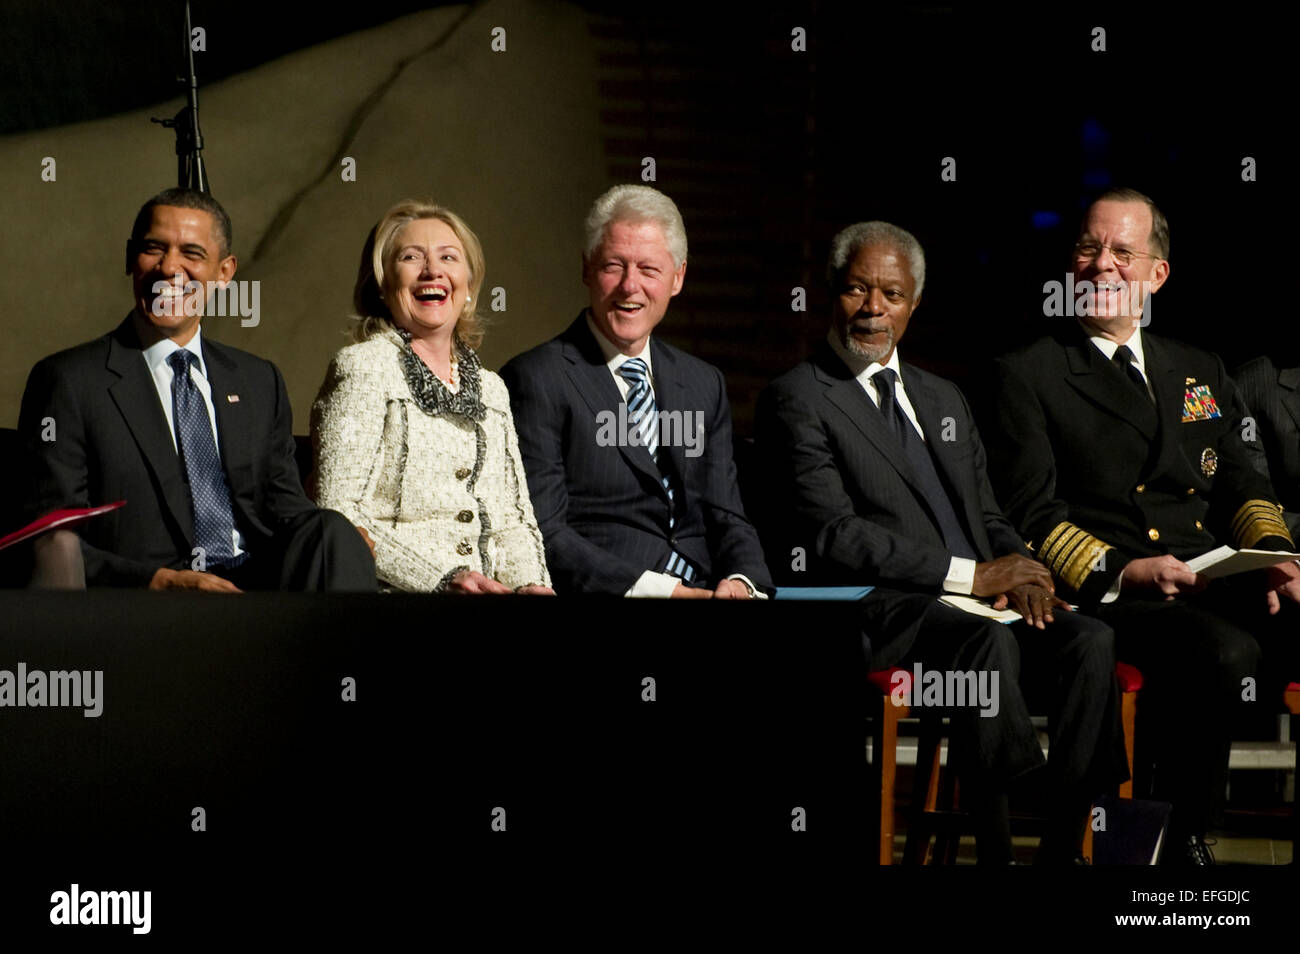 US President Barack Obama, Secretary of State Hillary Clinton, President Bill Clinton, former United Nation Secretary General Kofe Annan and U.S. Navy Adm. Mike Mullen, chairman of the Joint Chiefs of Staff share a laugh during the memorial service for Ambassador Richard C. Holbrooke at the John F. Kennedy Center for Performing Arts January 14, 2011 in Washington, DC. Holbrooke, the Special Envoy to Afghanistan and Pakistan, died in December 2010 after a nearly 50 year career in foreign service. Stock Photo